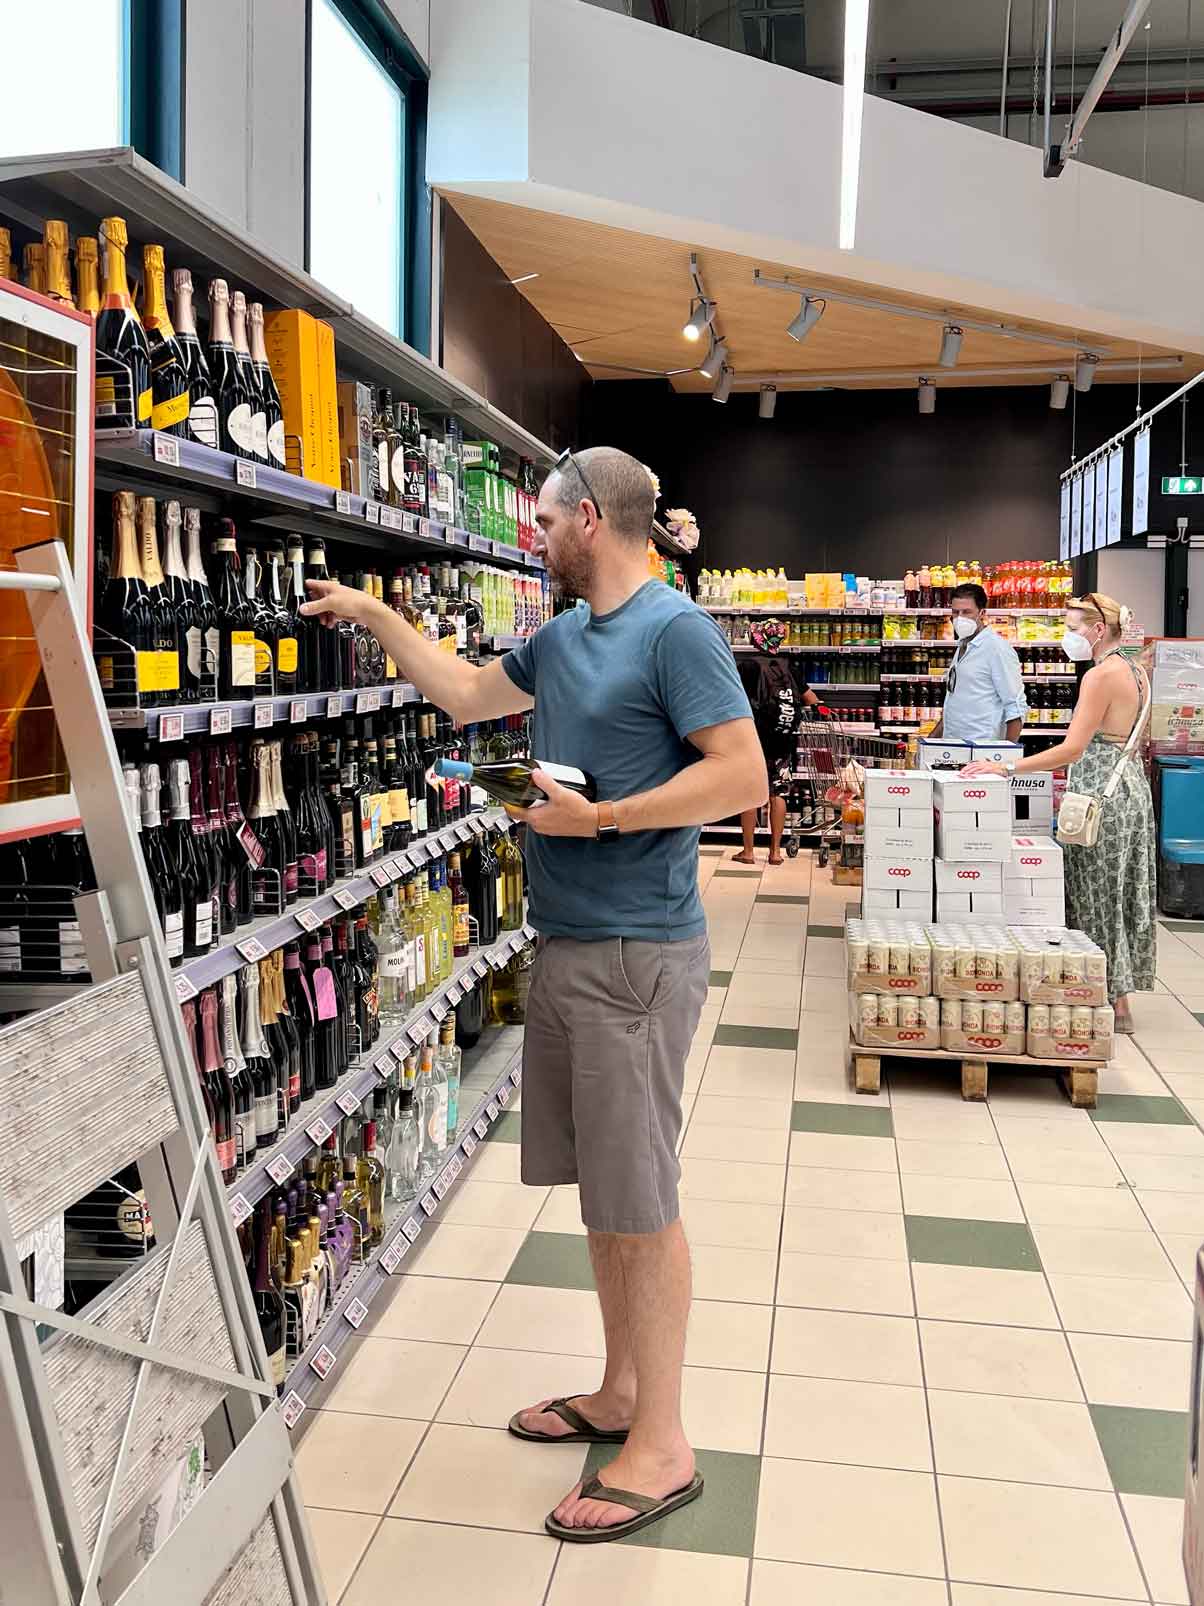 Man looking at wine selection at grocery store